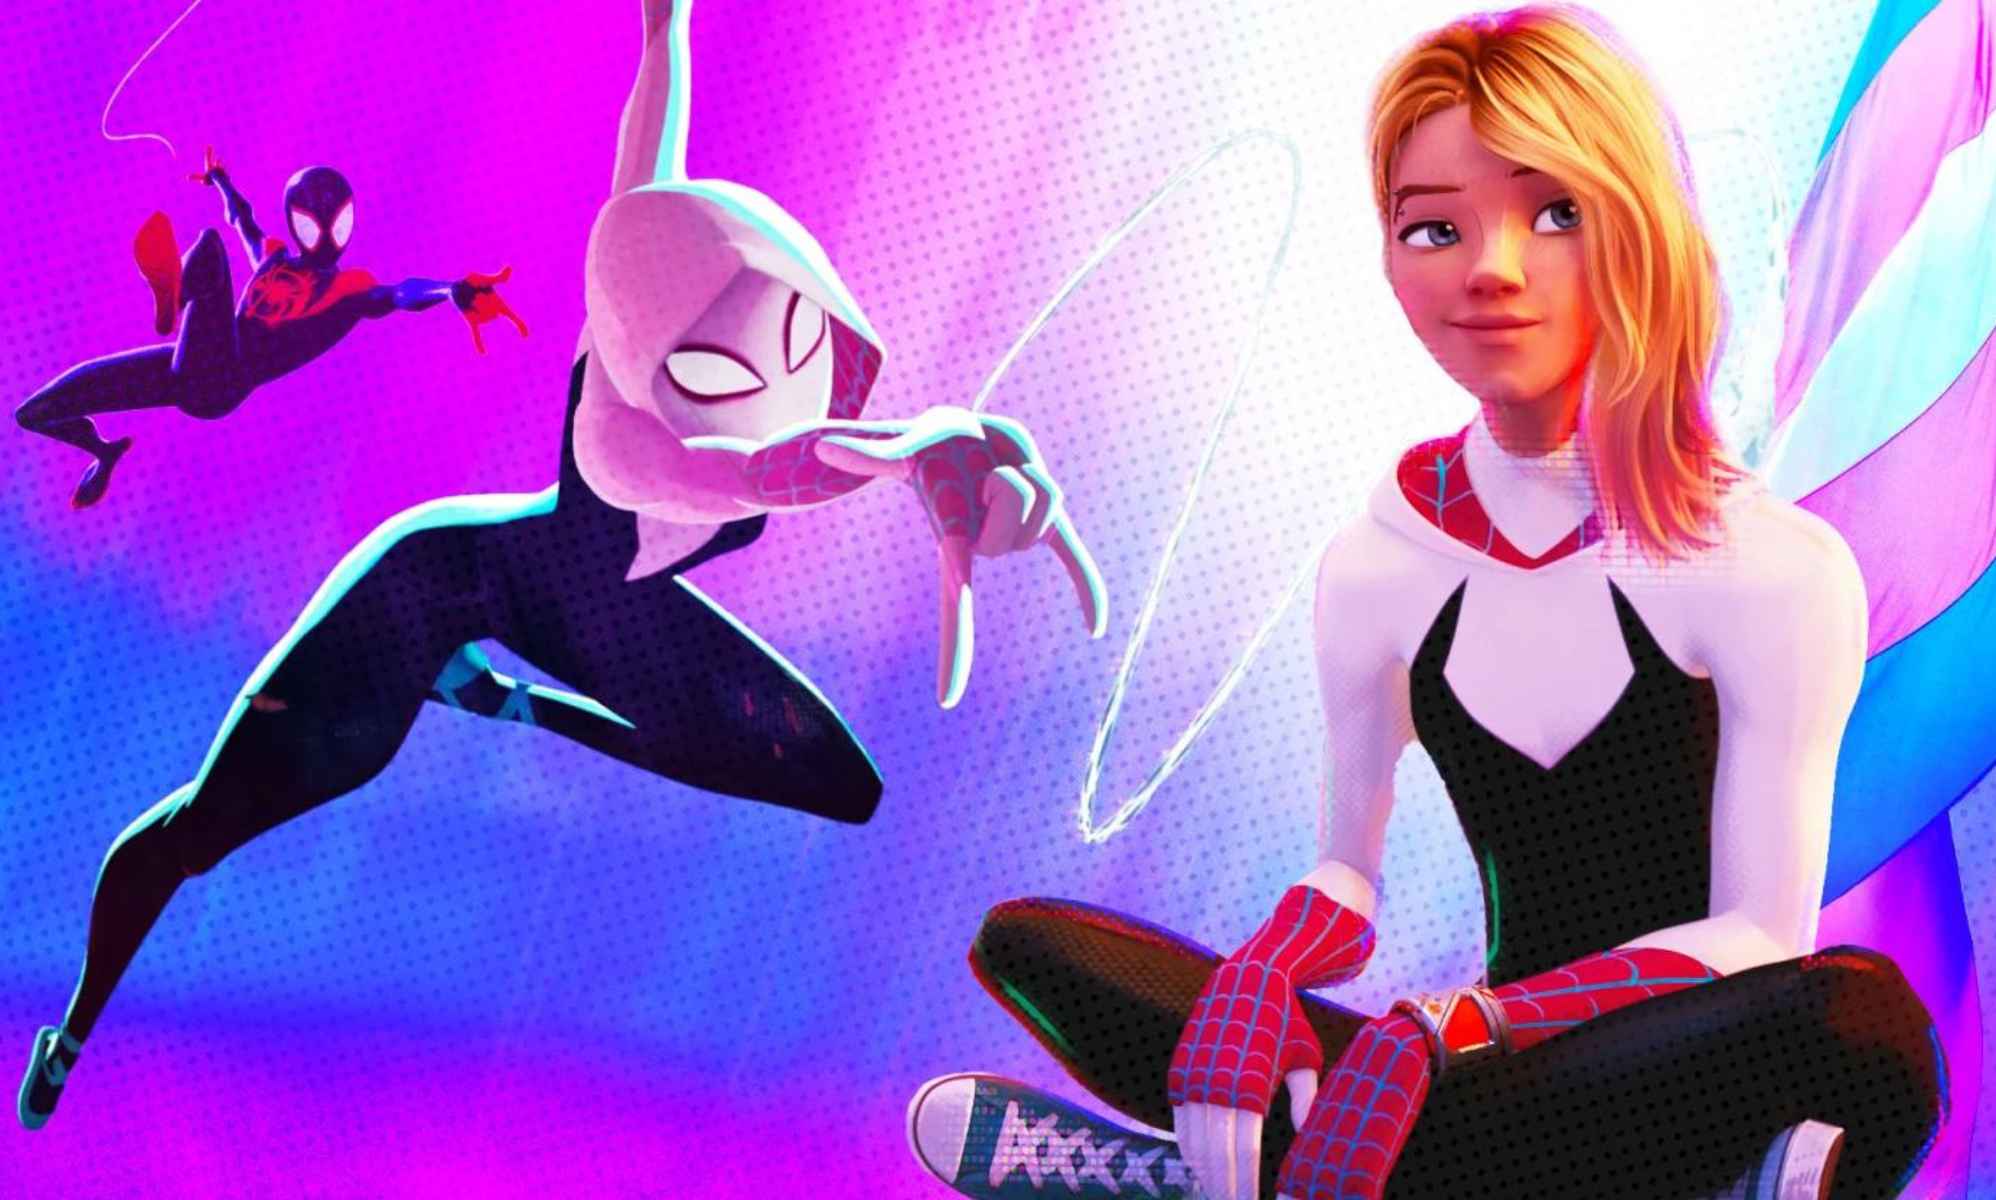 Spider-Man: Across the Spider-Verse Scary for Kids? Movie Review